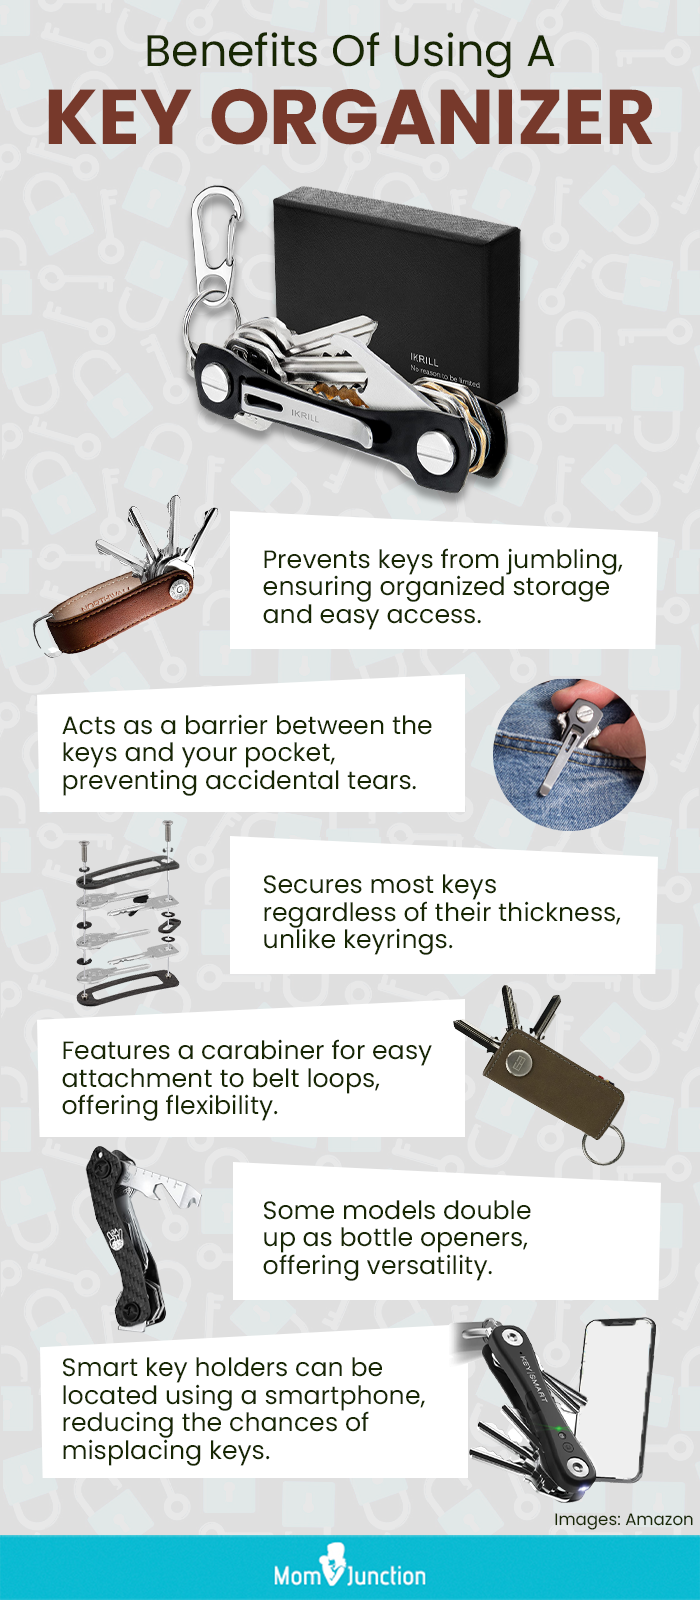 Benefits Of Using A Key Organizer (infographic)